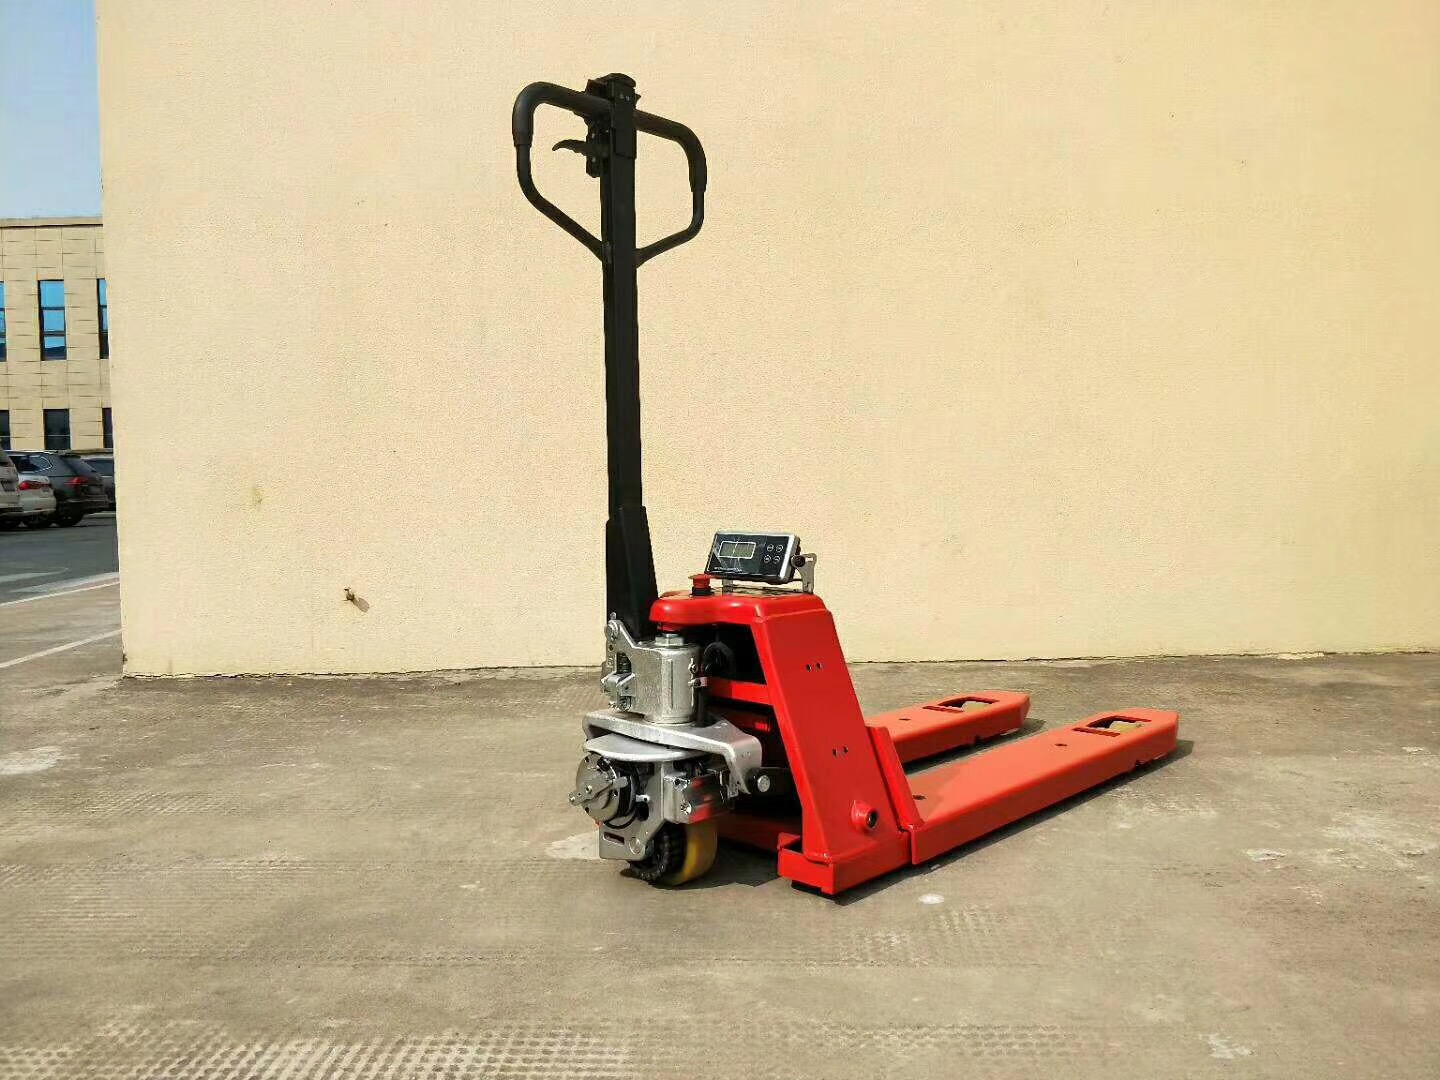 Powered Hand Pallet Truck With Scale And Printer